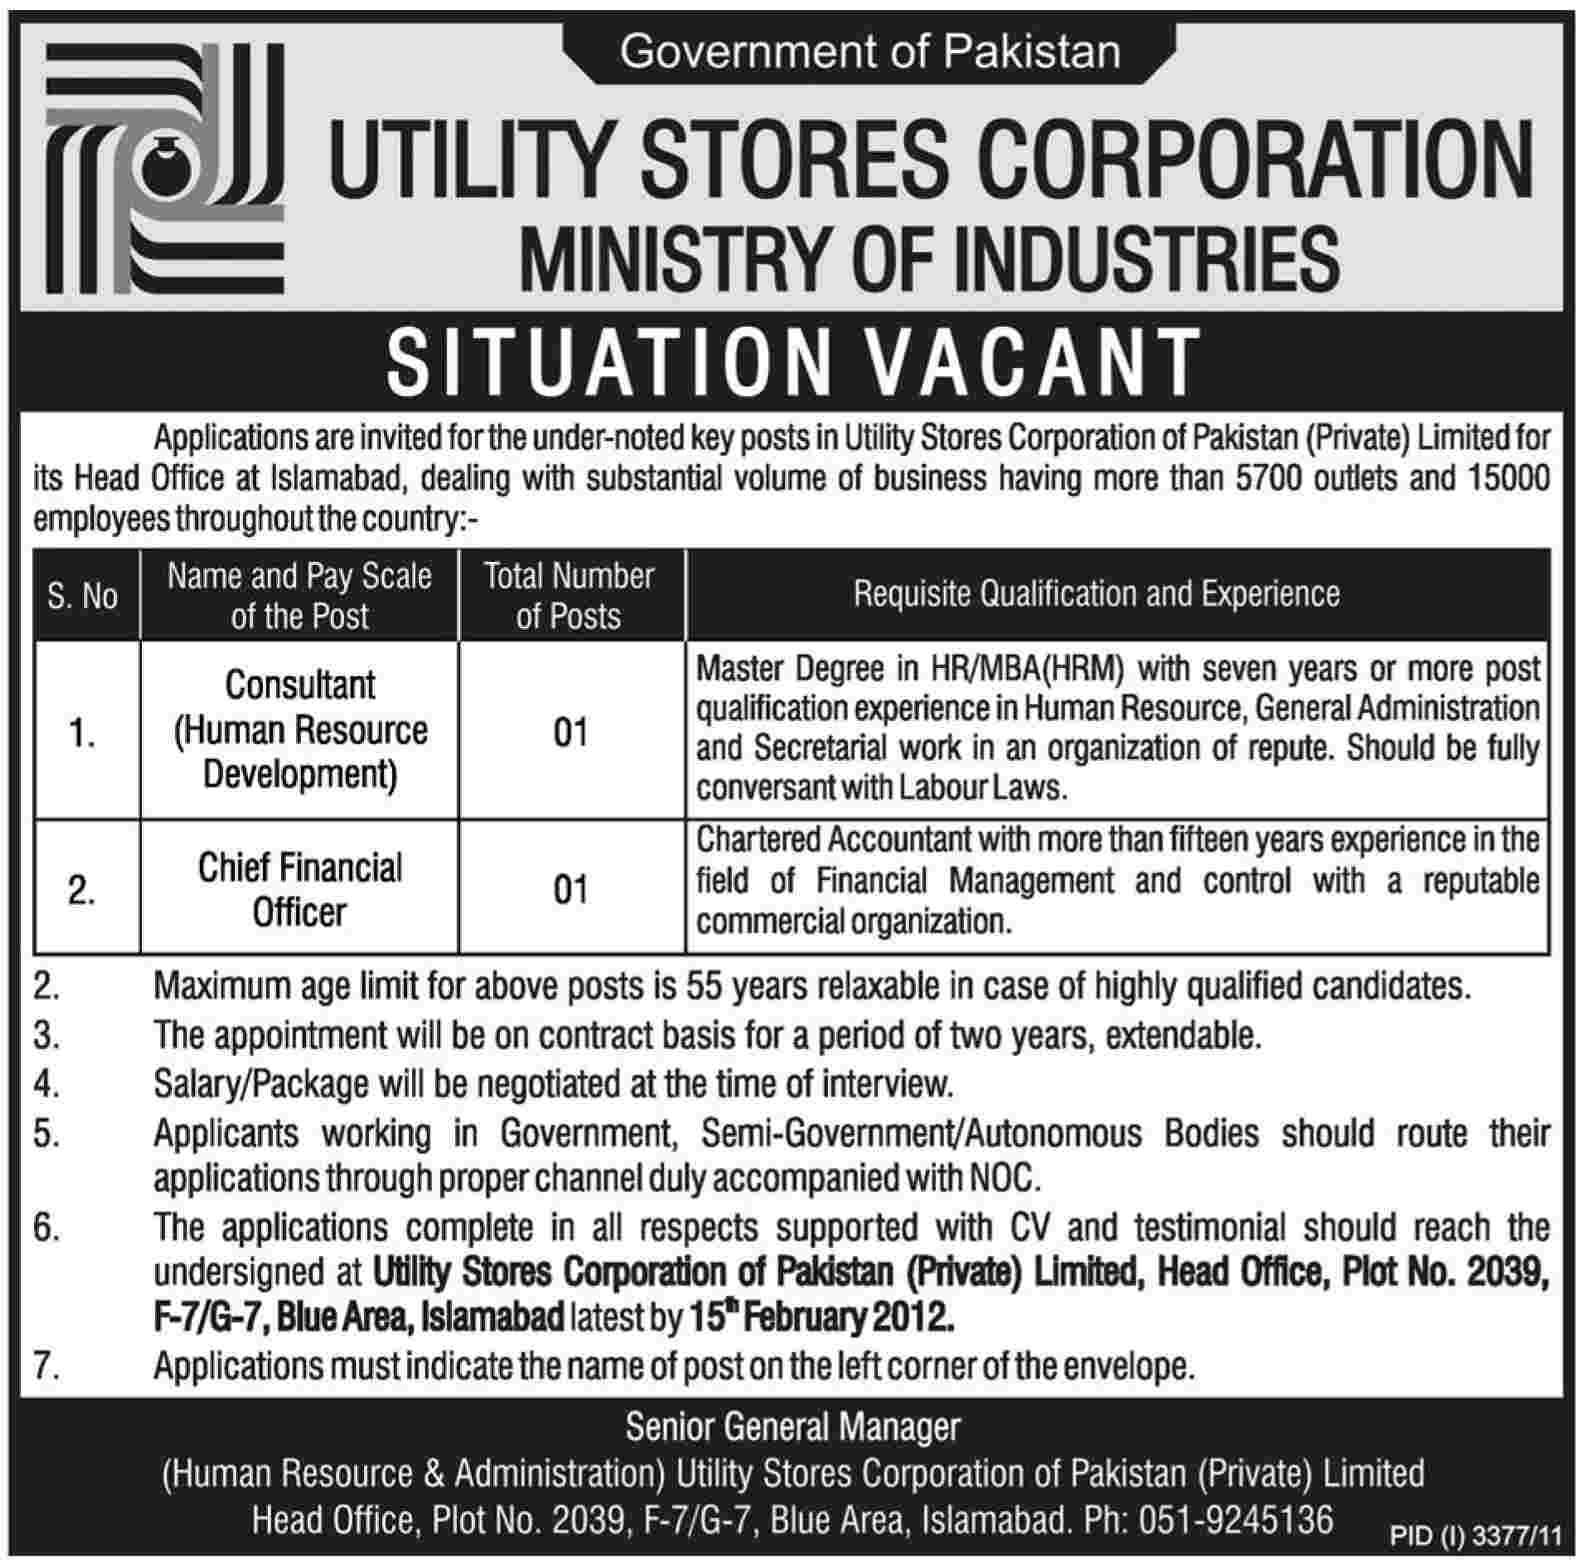 Utility Stores Corporation, Ministry of Industries Jobs Opportunity